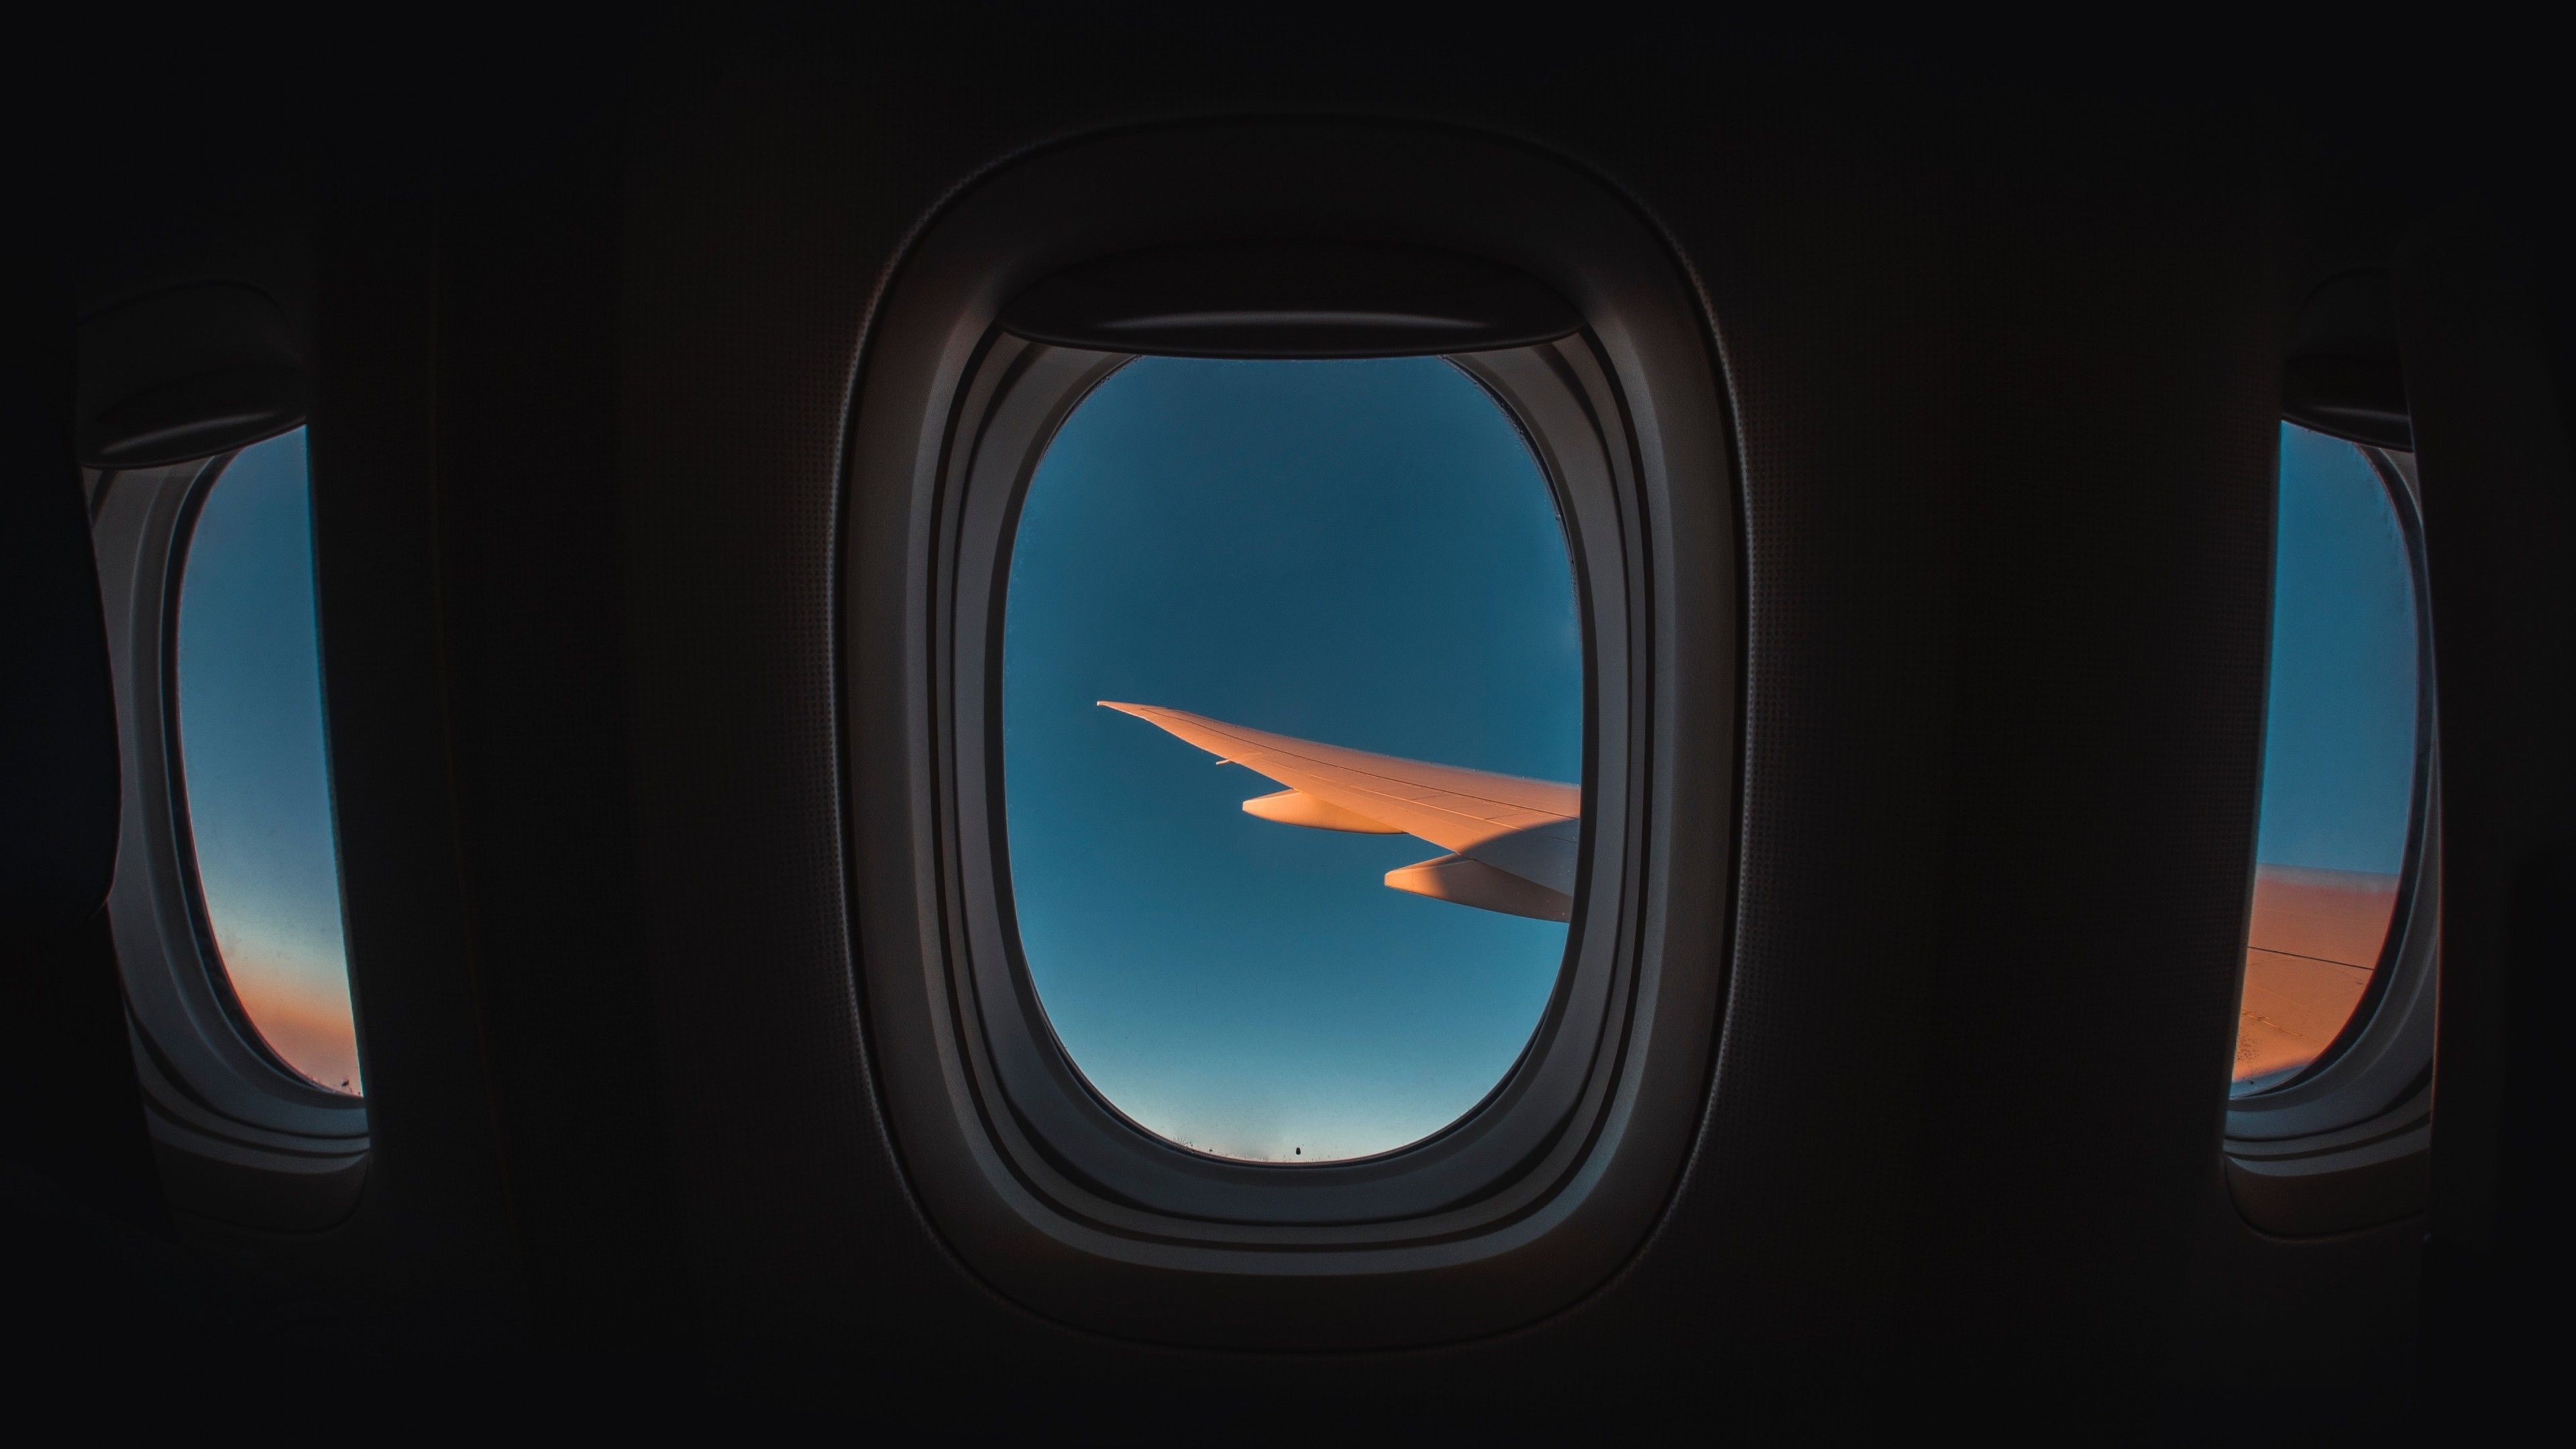 view from airplane window wallpaper